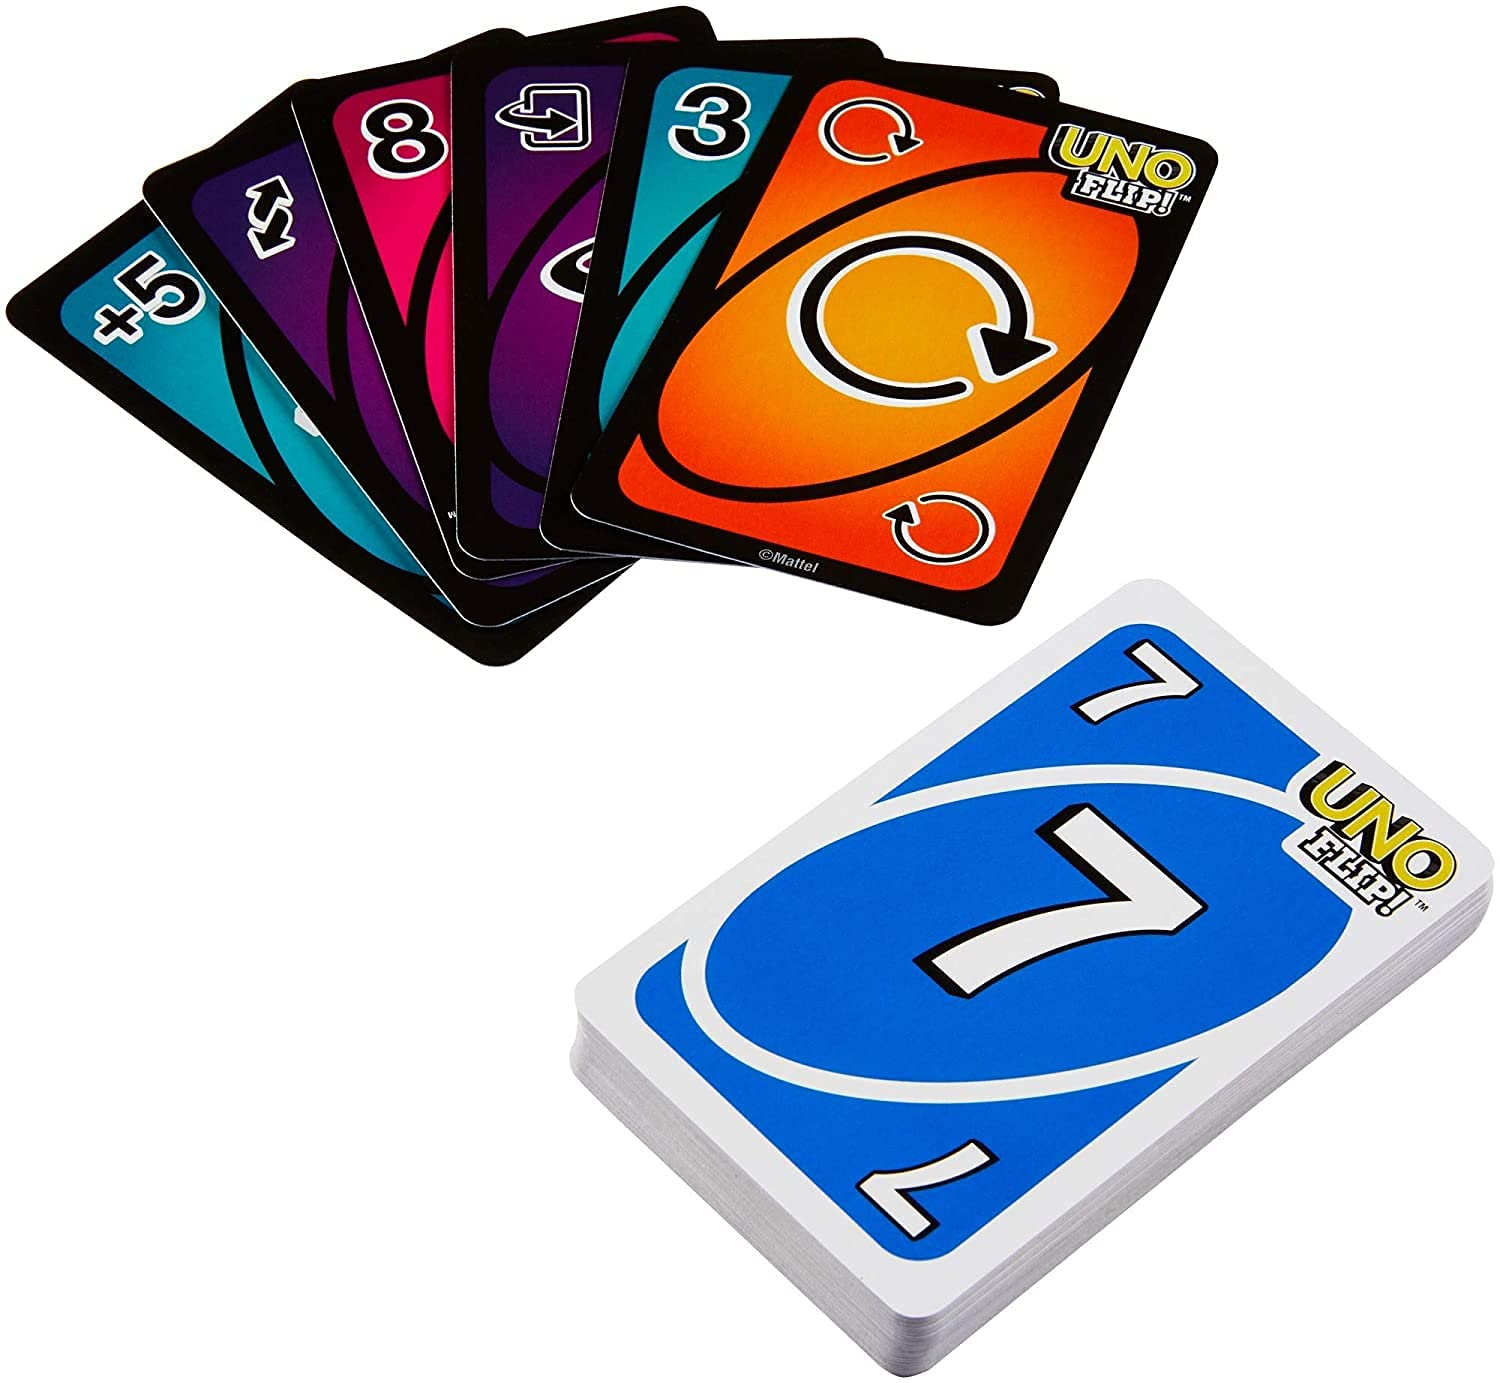 UNO Flip Card Meanings: What Do The Cards Mean On UNO Flip?